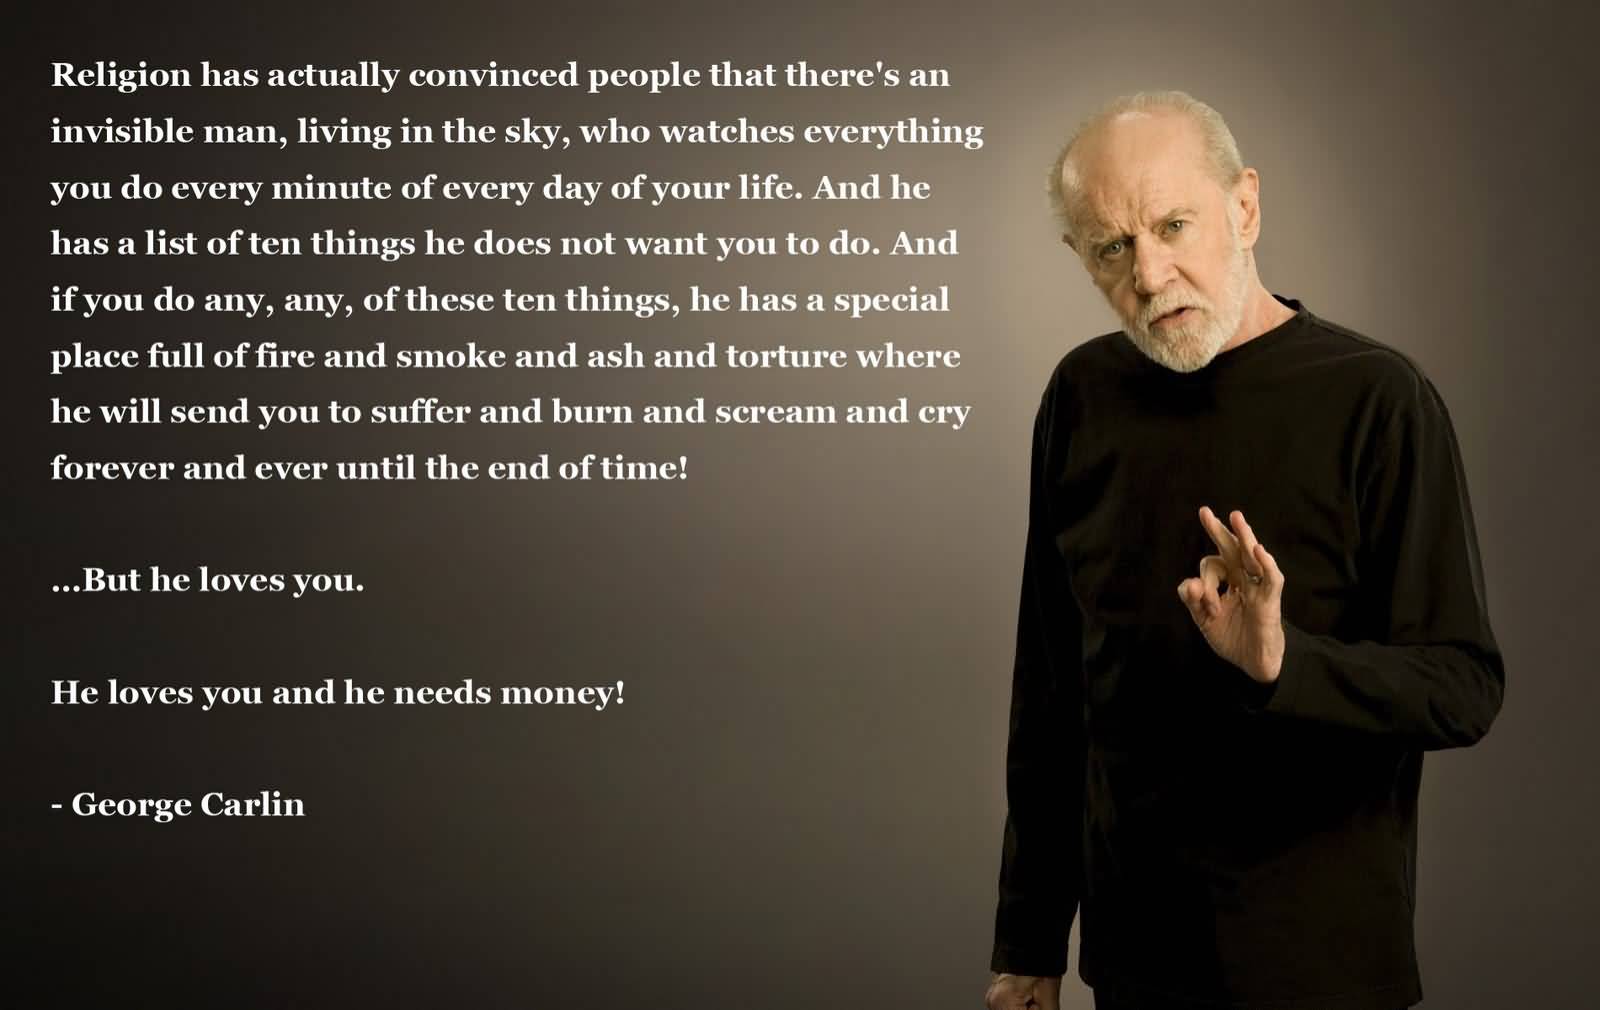 Religion has actually convinced people that there's an invisible man living in the sky who watches everything you do, every minute of every day. And the ... George Carlin